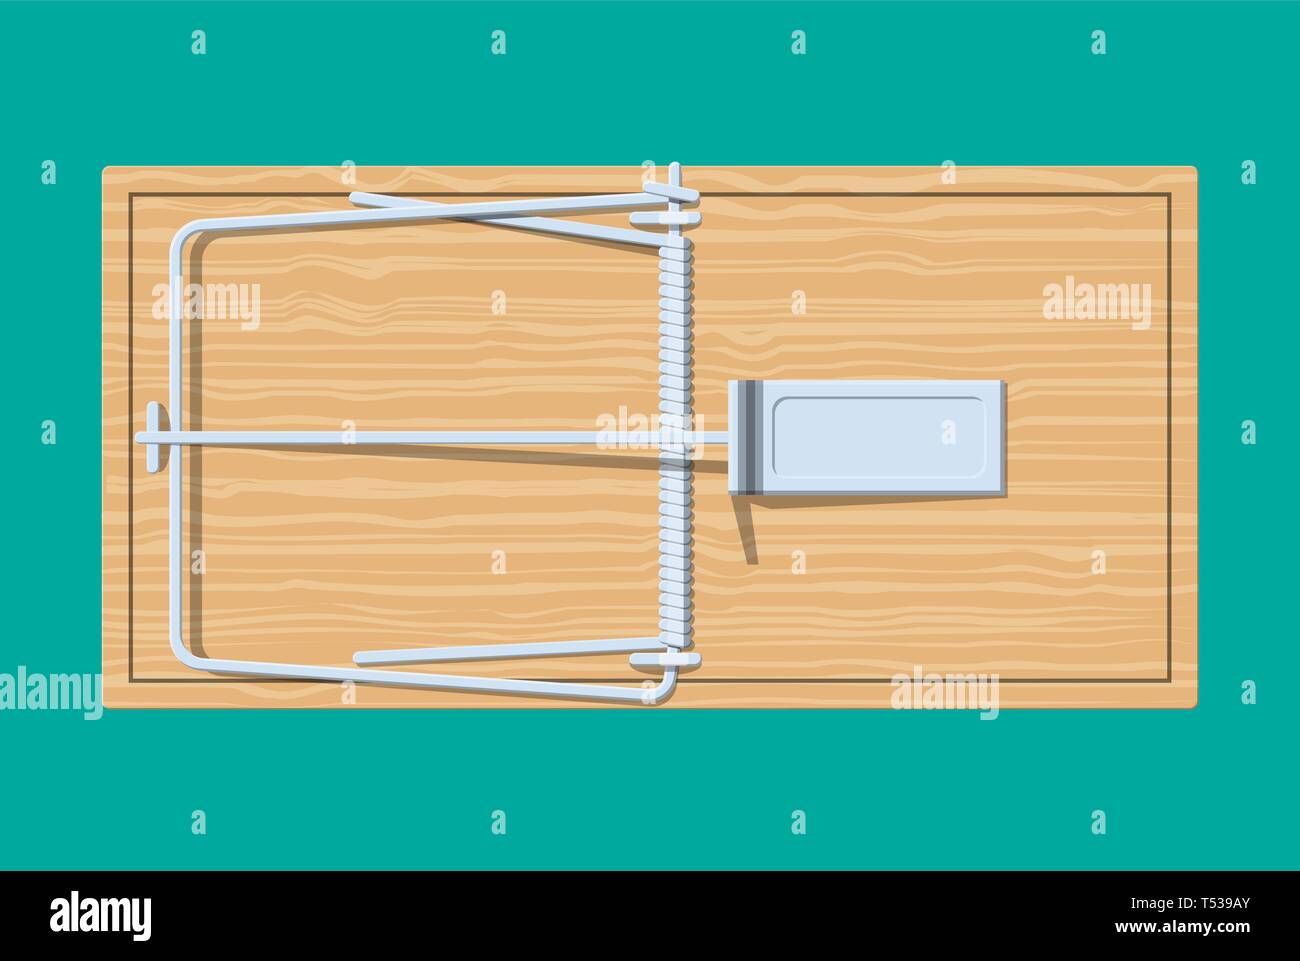 https://c8.alamy.com/comp/T539AY/wooden-mouse-trap-classical-spring-loaded-bar-trap-top-view-vector-illustration-in-flat-style-T539AY.jpg